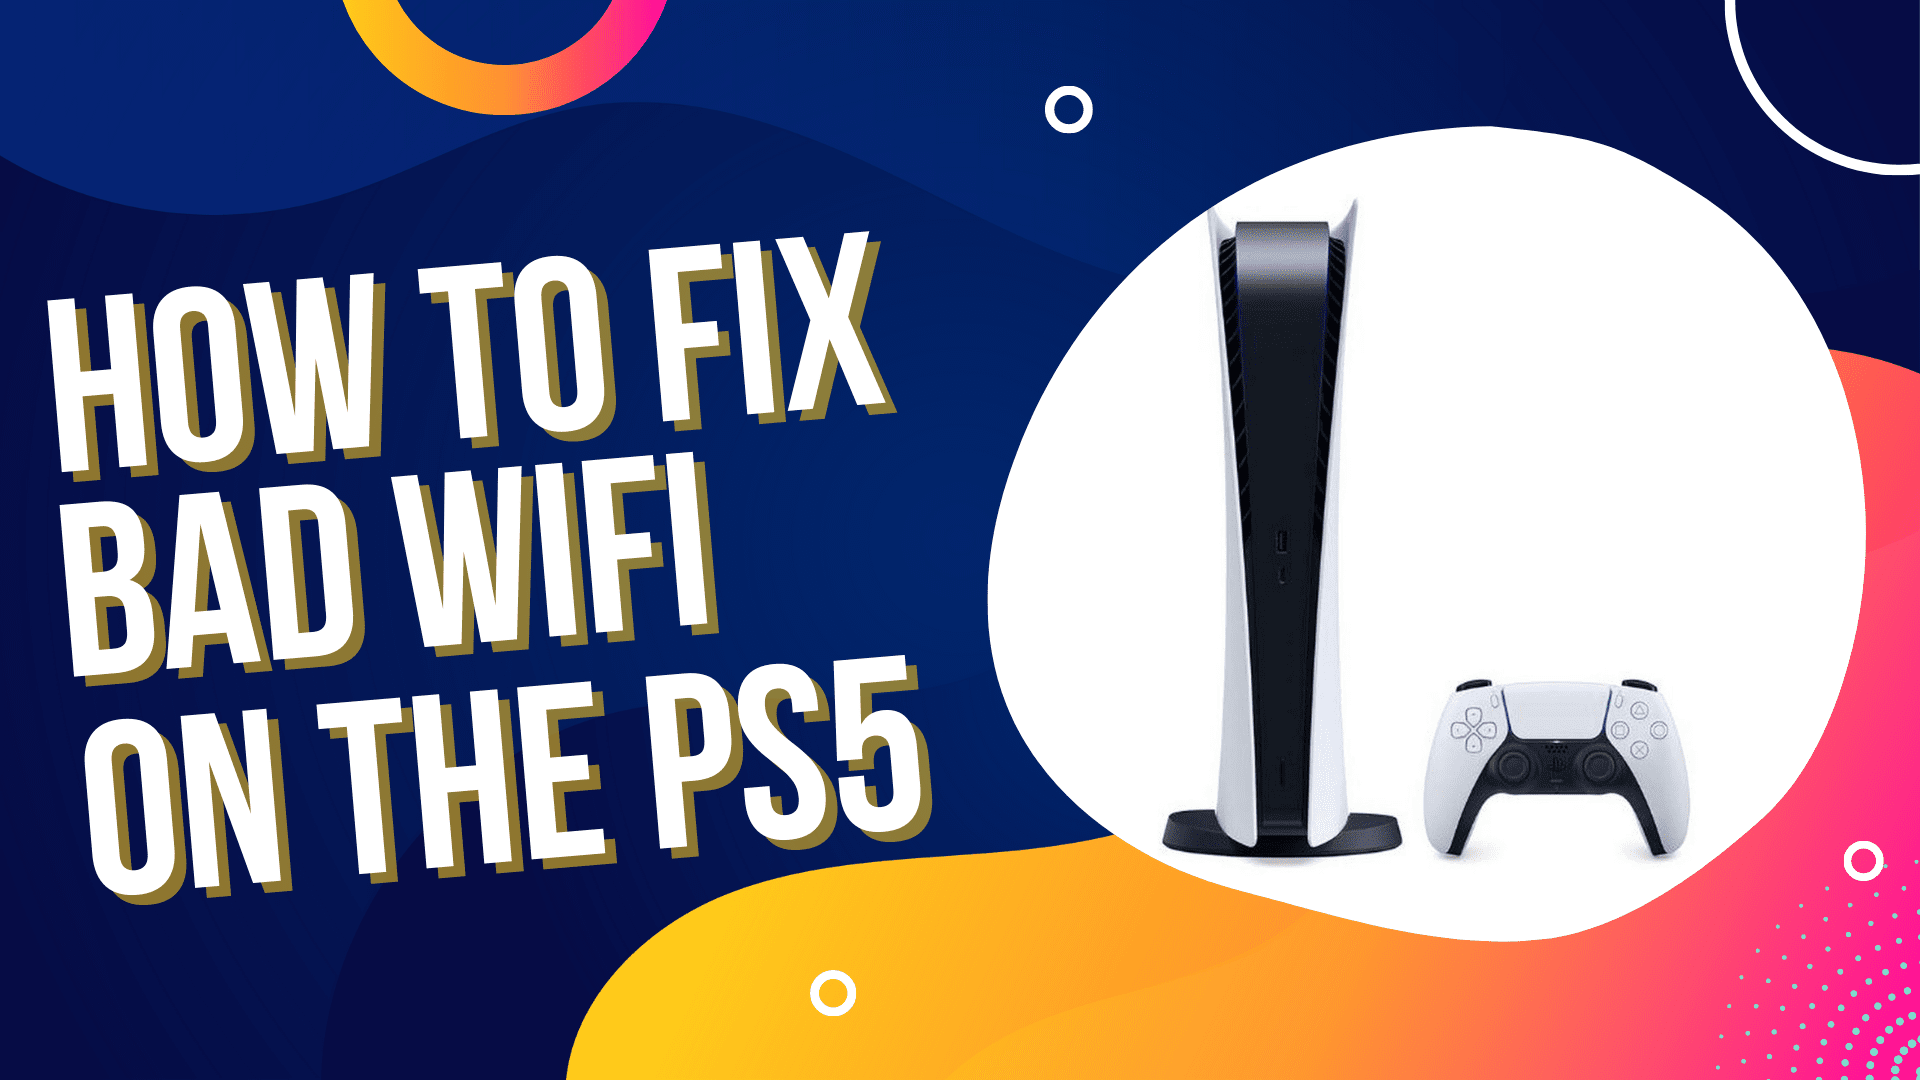 How to fix bad WiFi on the Sony PS5